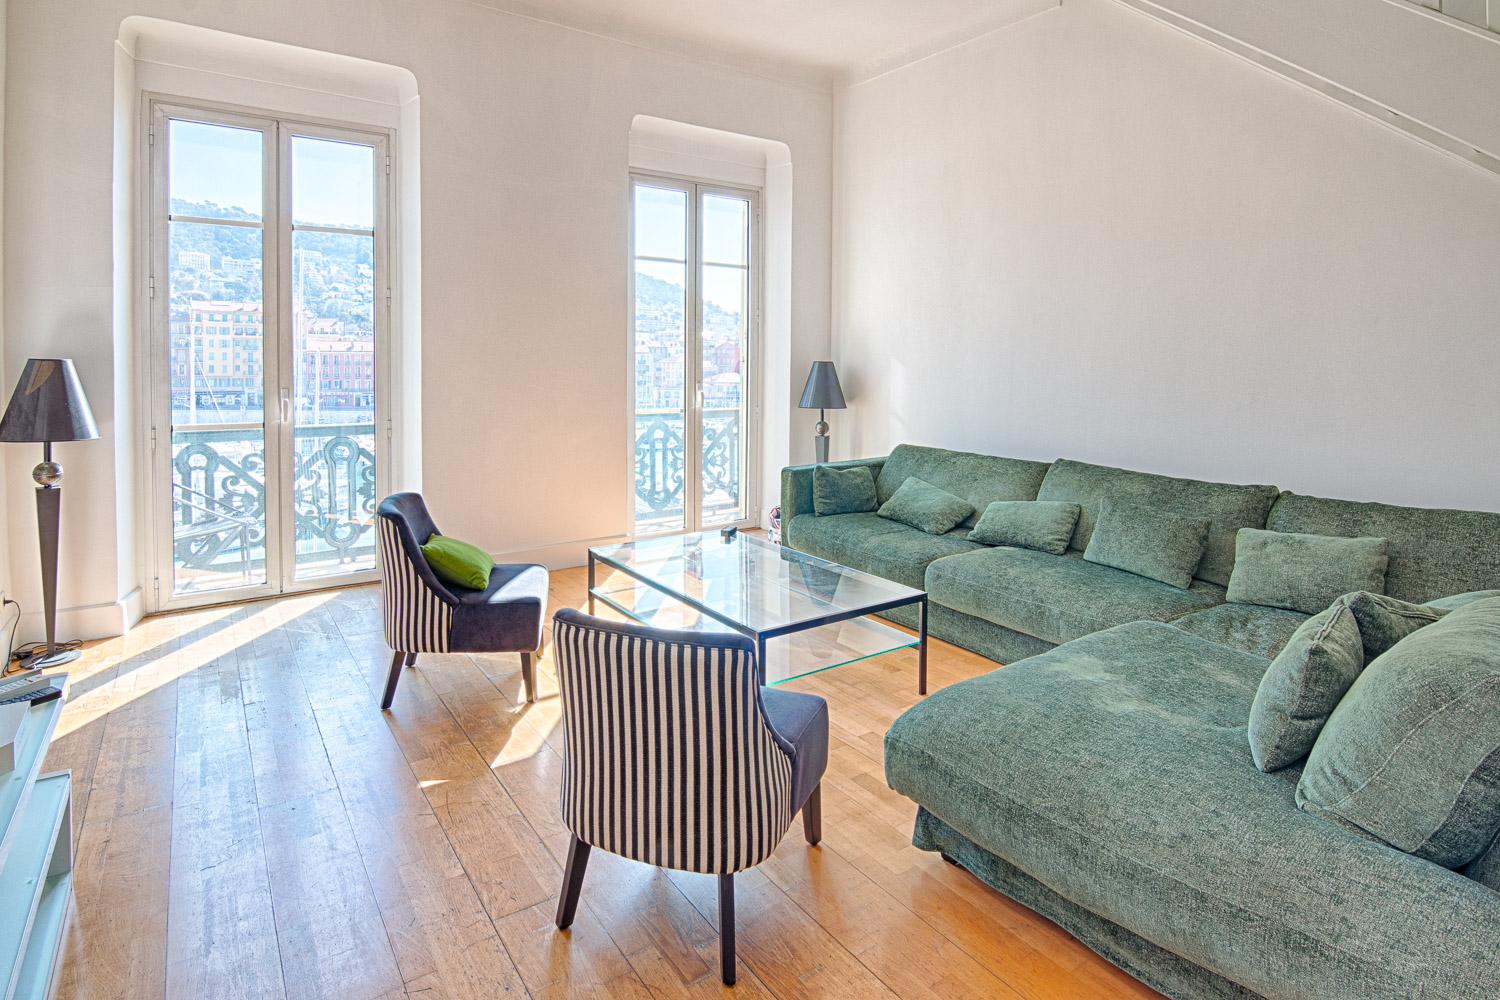 Lou Passagin - Lovely apartment with a view - Apartments for Rent in Nice,  Provence-Alpes-Côte d'Azur, France